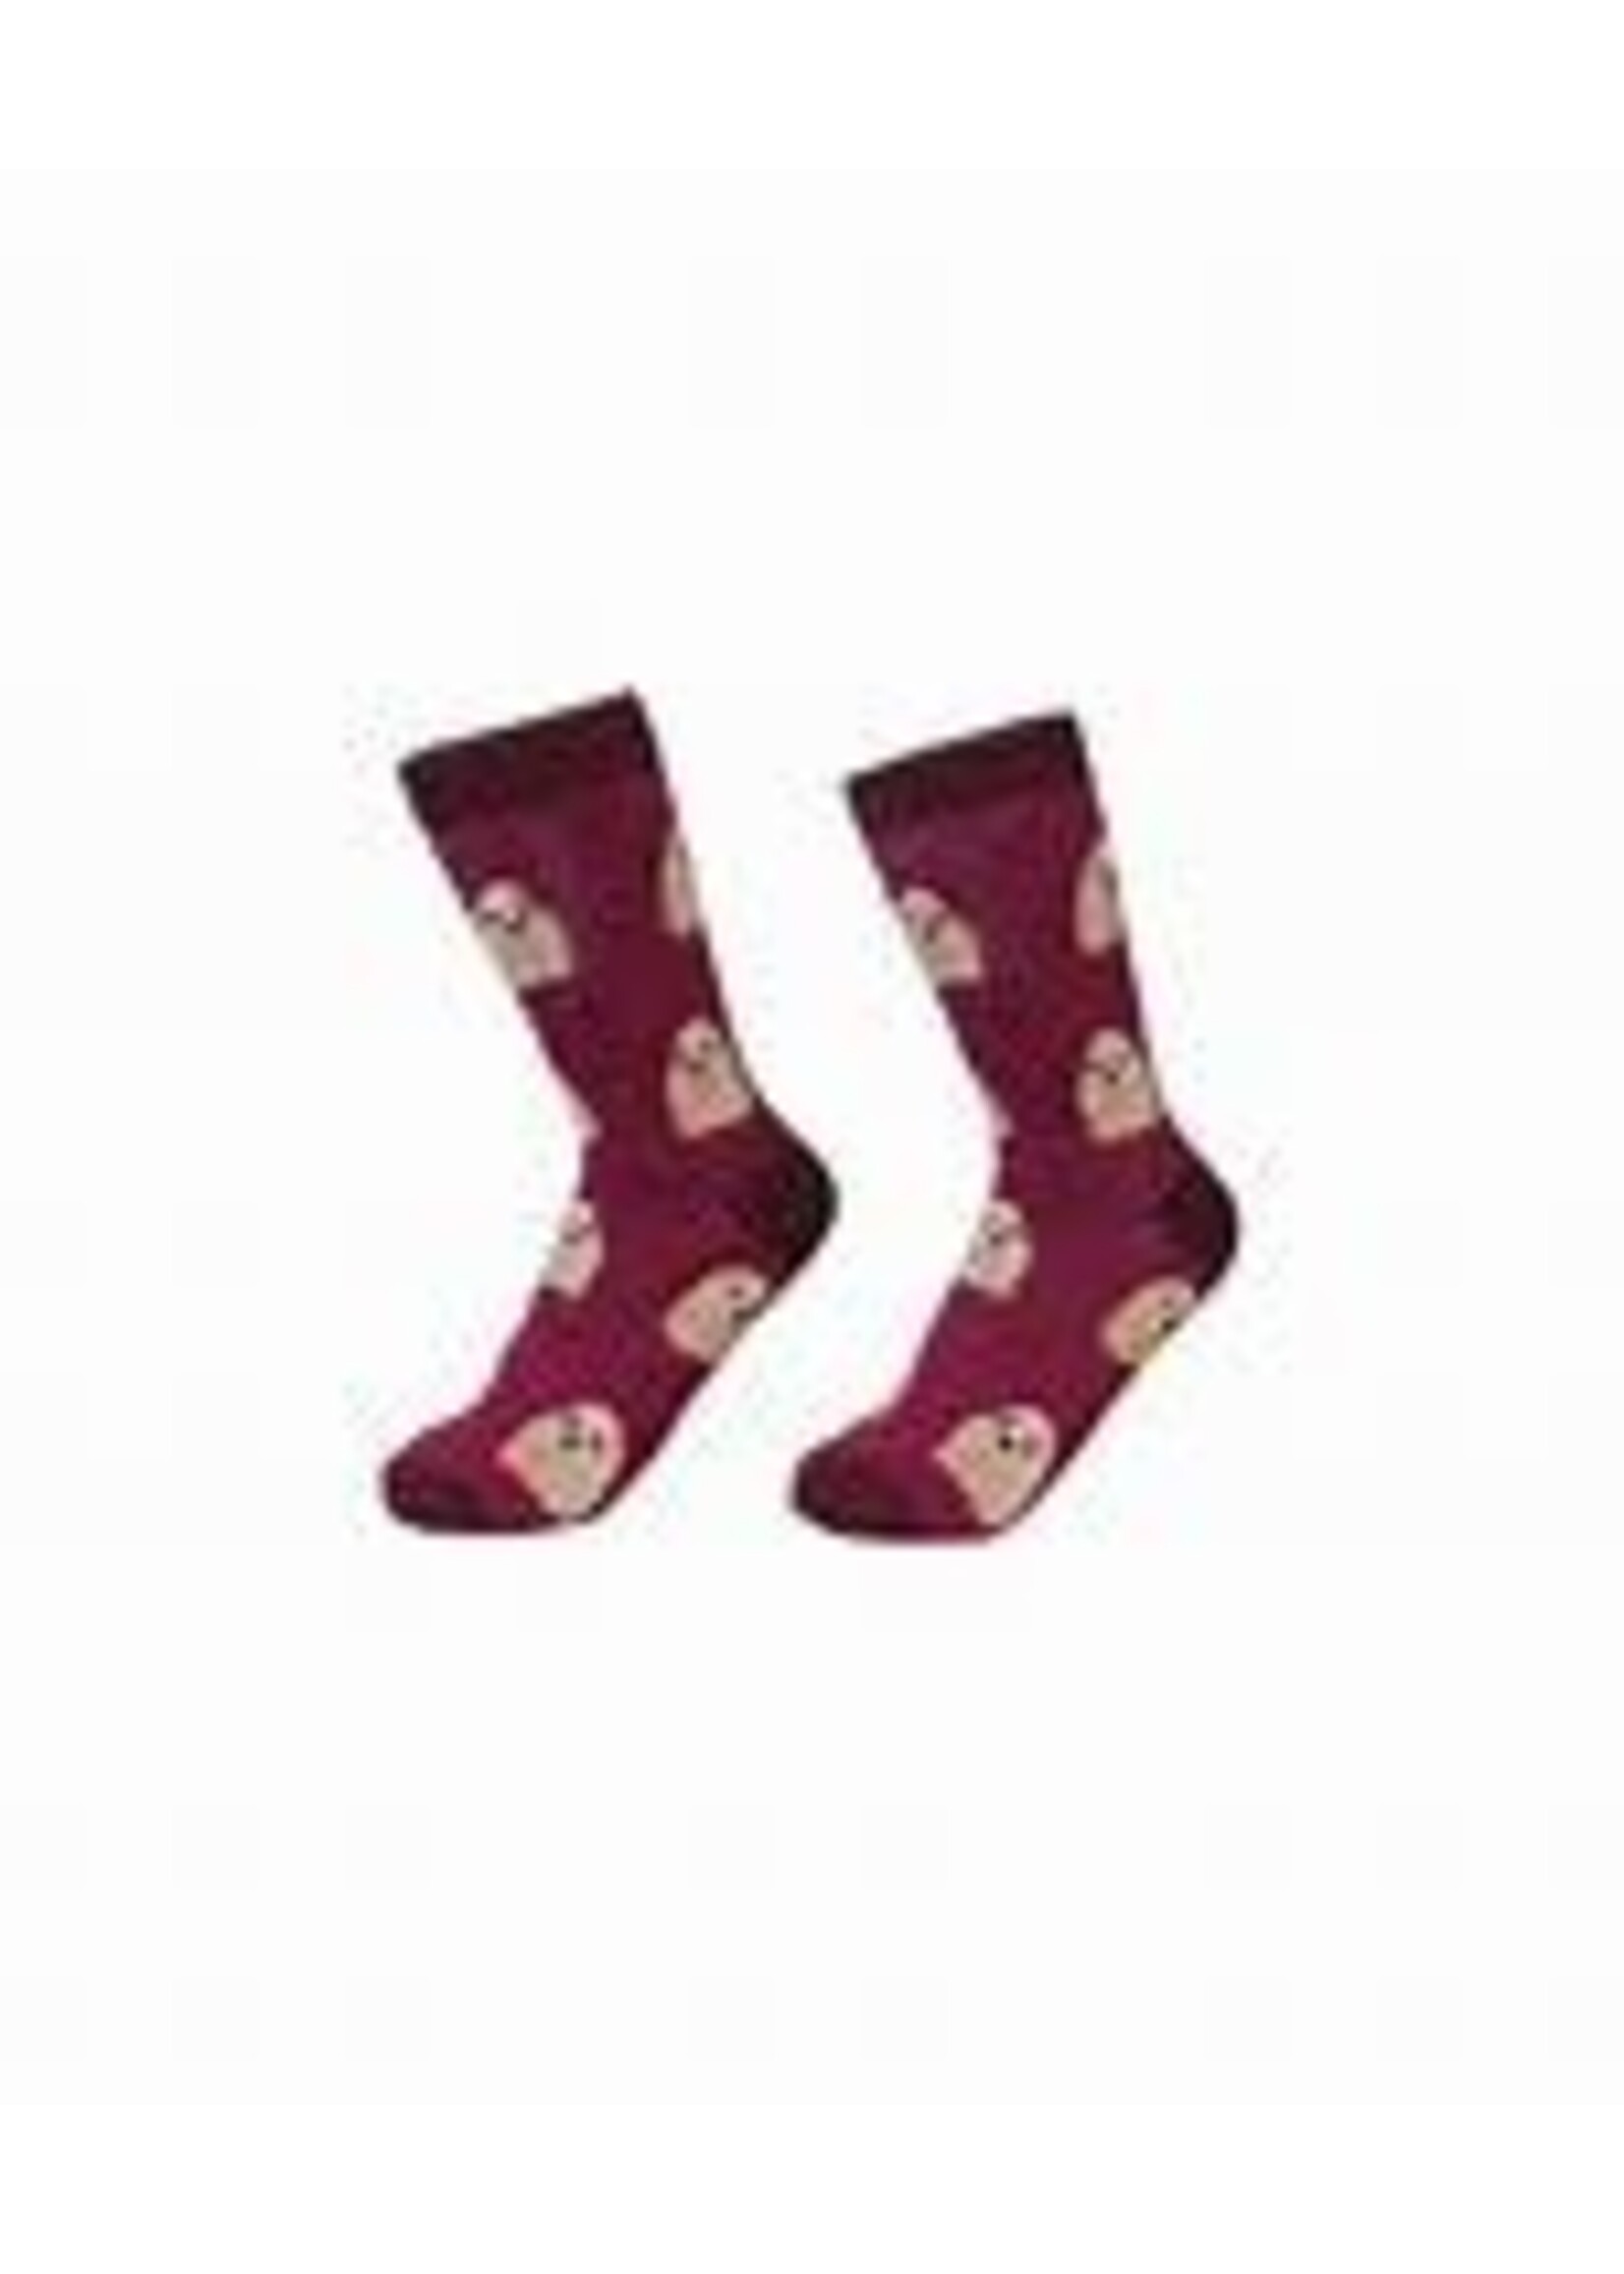 E&S Imports ES Pets Sock Daddy Socks Unisex One Size